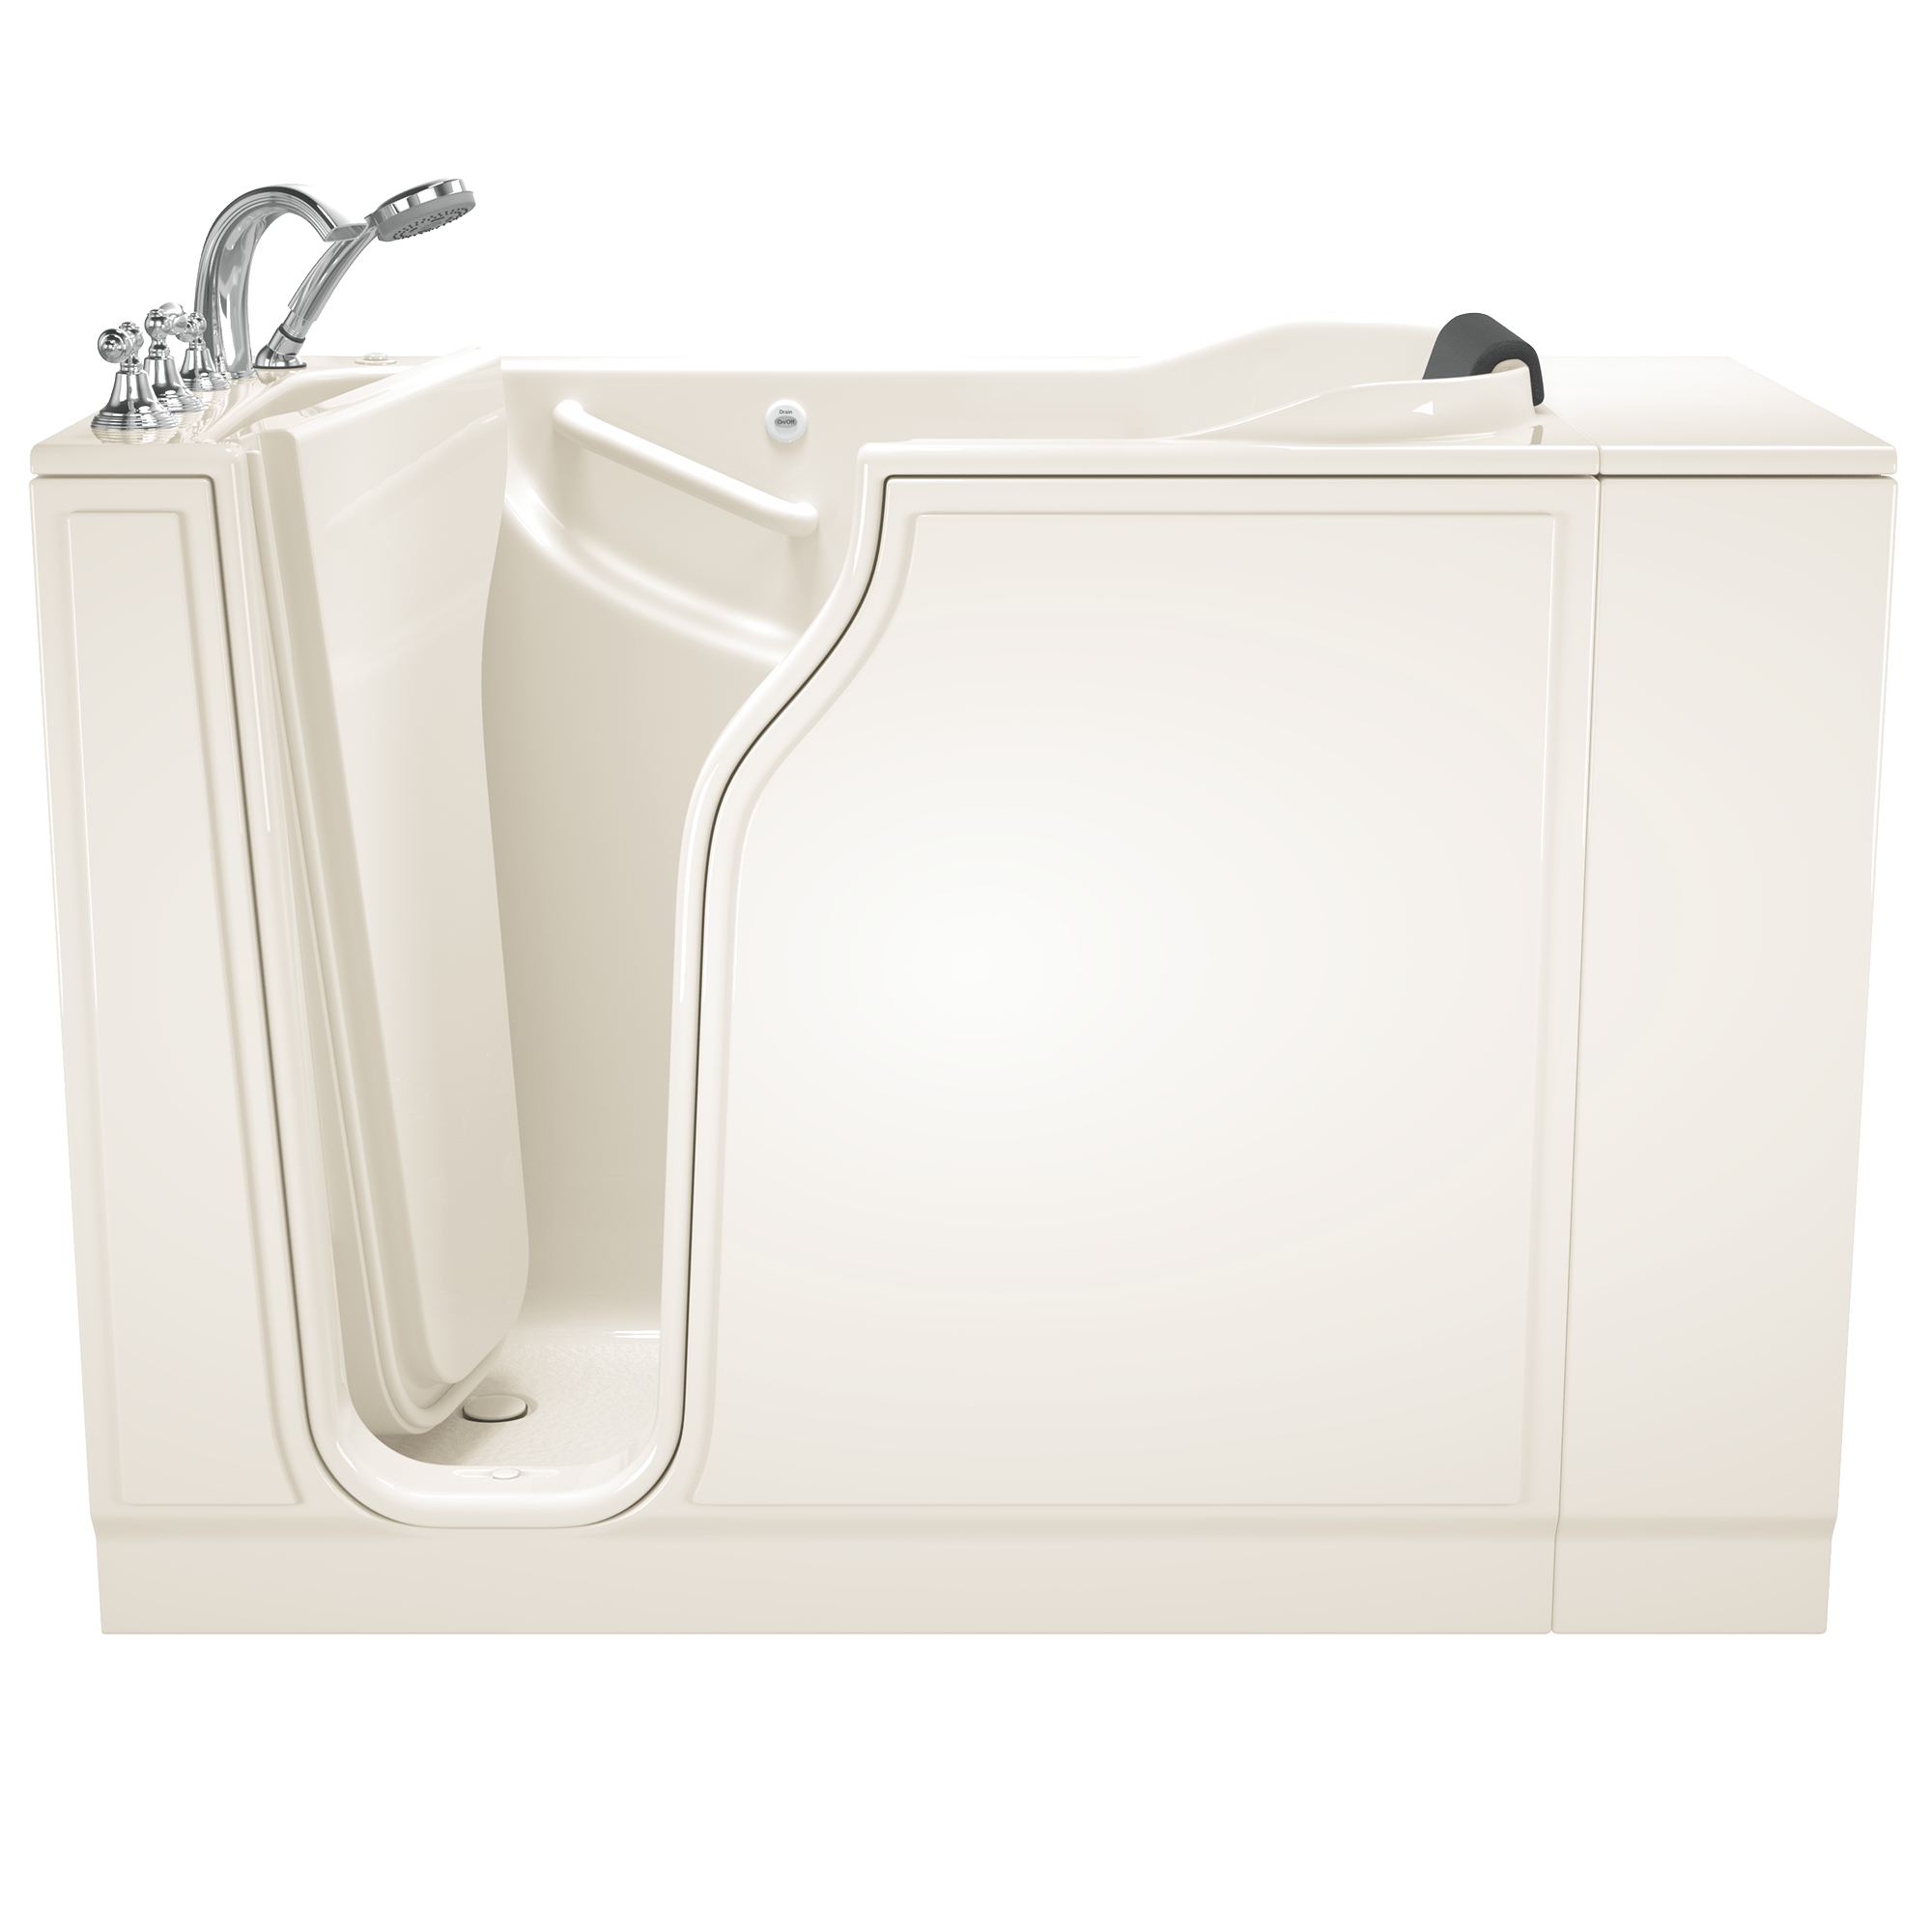 Gelcoat Premium Series 30 x 52  Inch Walk in Tub With Whirlpool System   Left Hand Drain With Faucet WIB LINEN